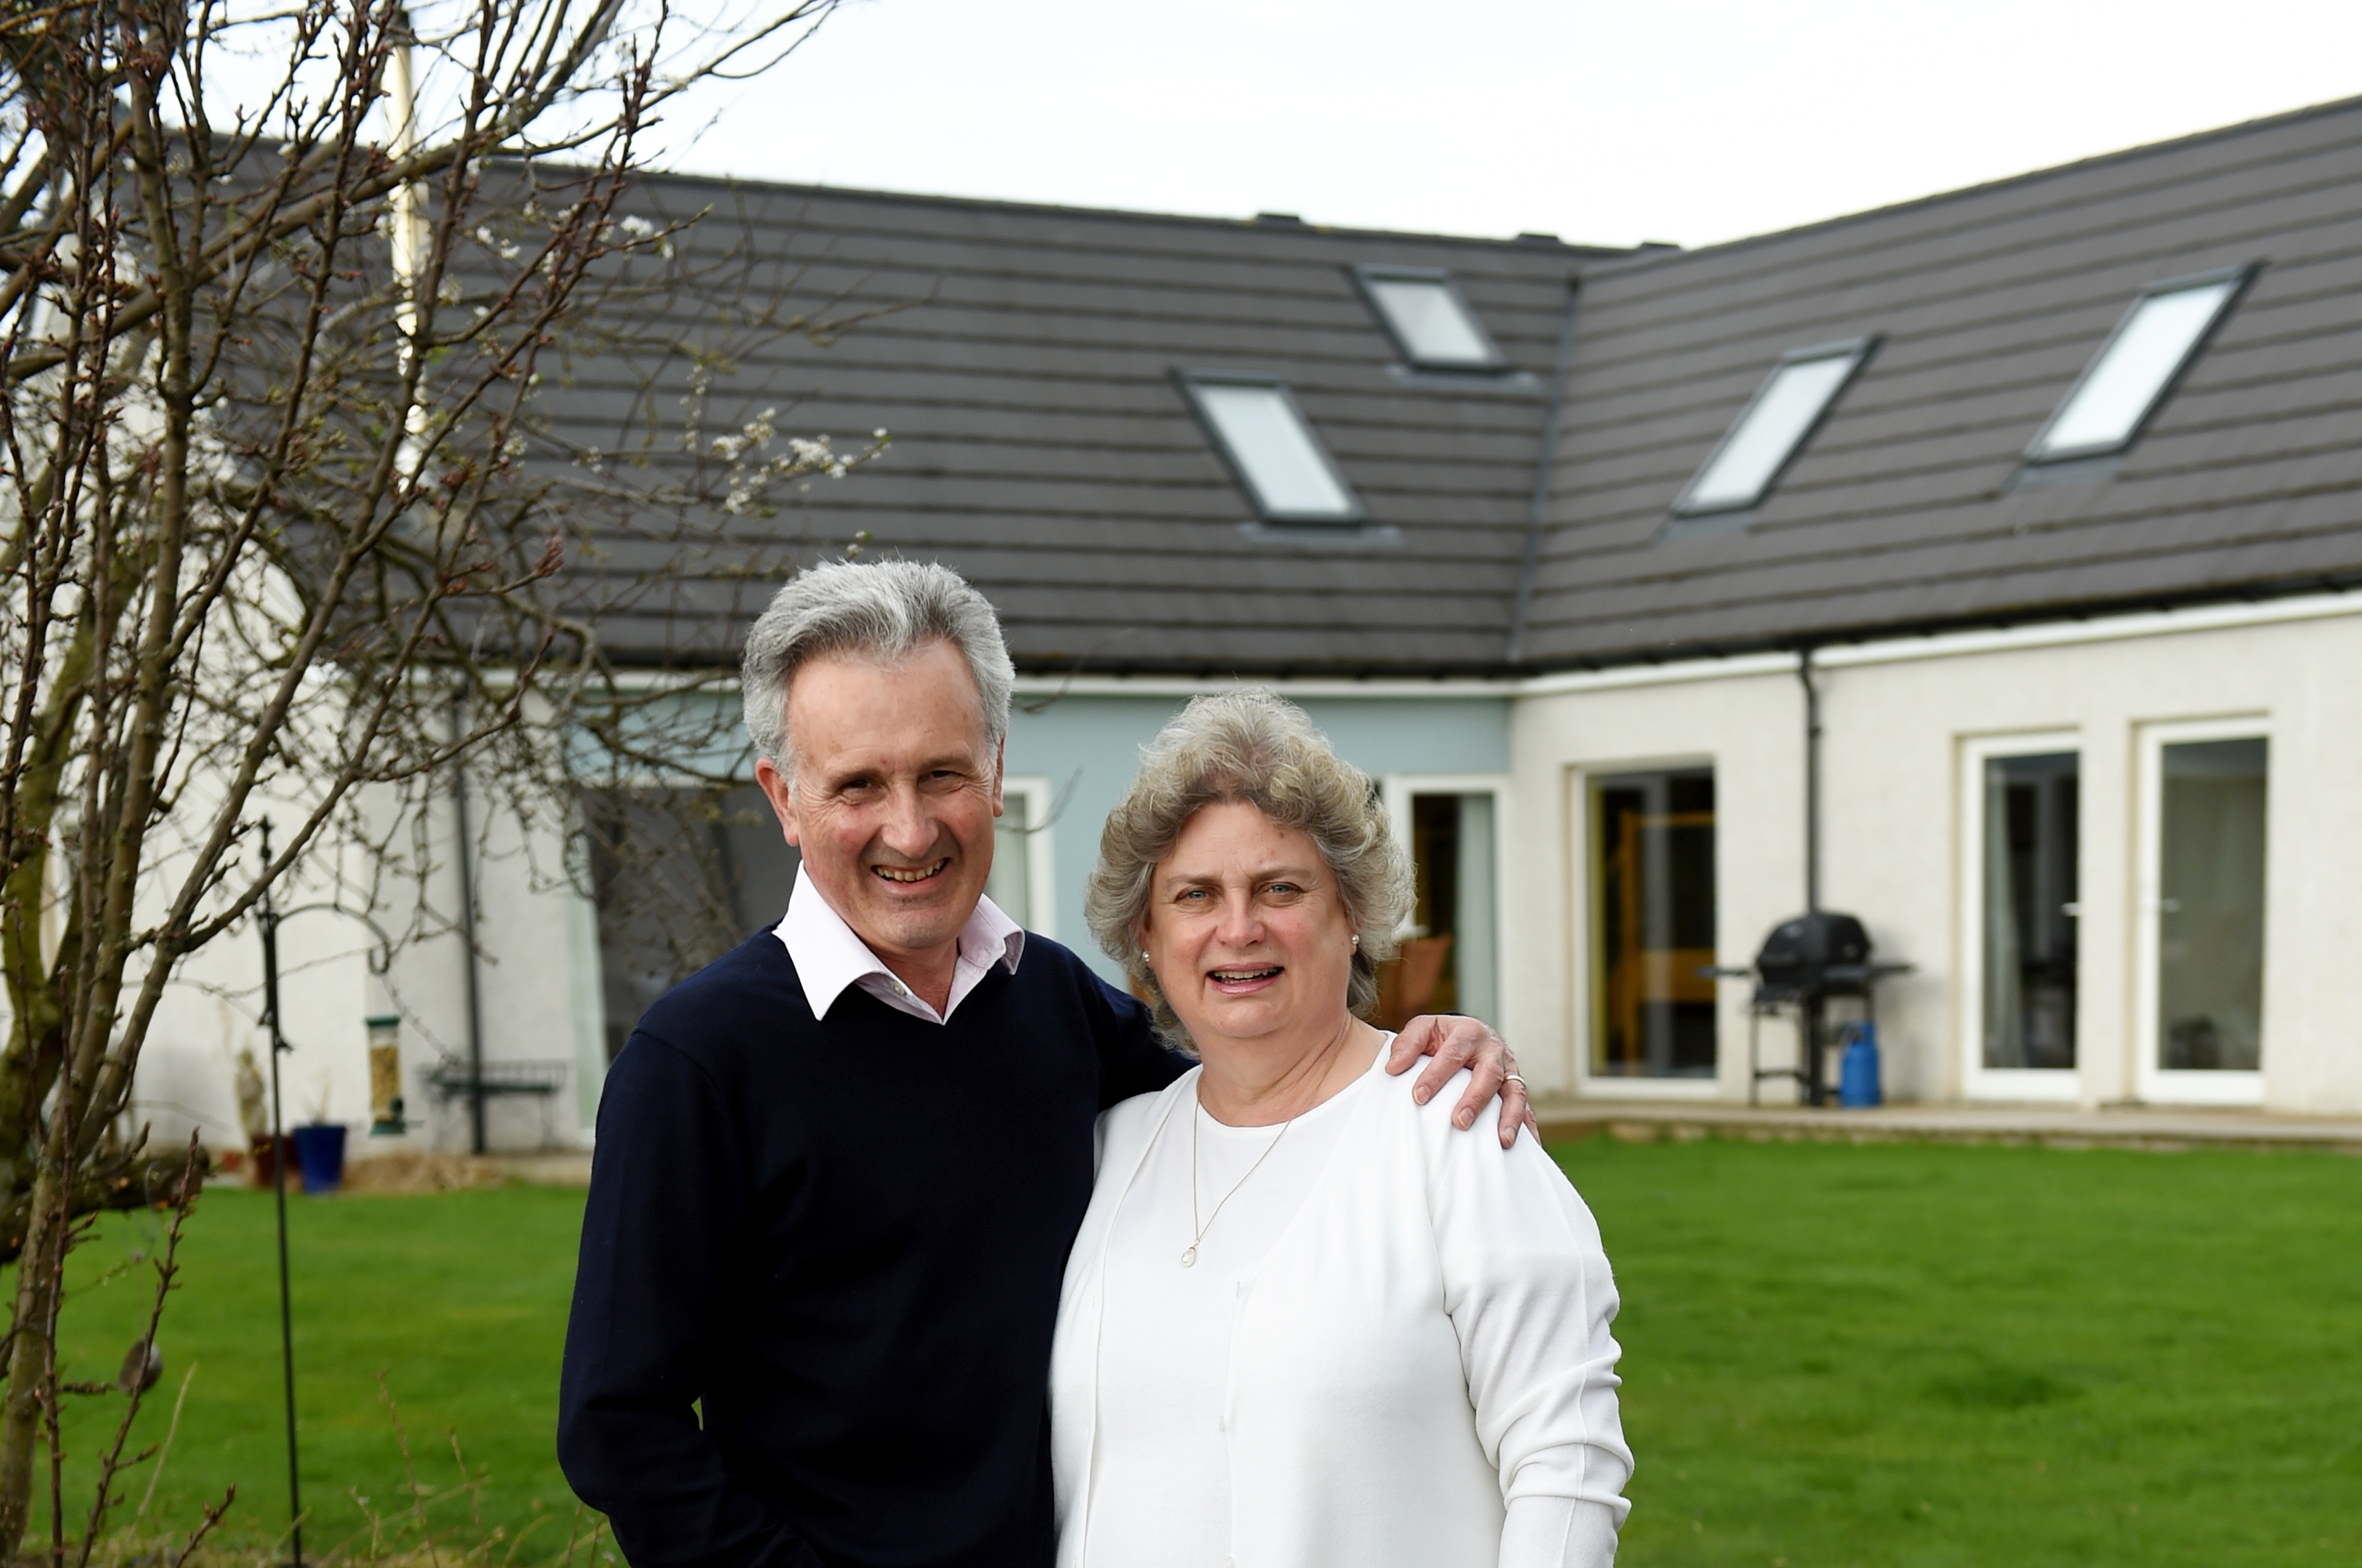 Ewe House, Whiteinch Smallholdings, Kinloss, is the home of Steve and Anne-Marie Skidmore.